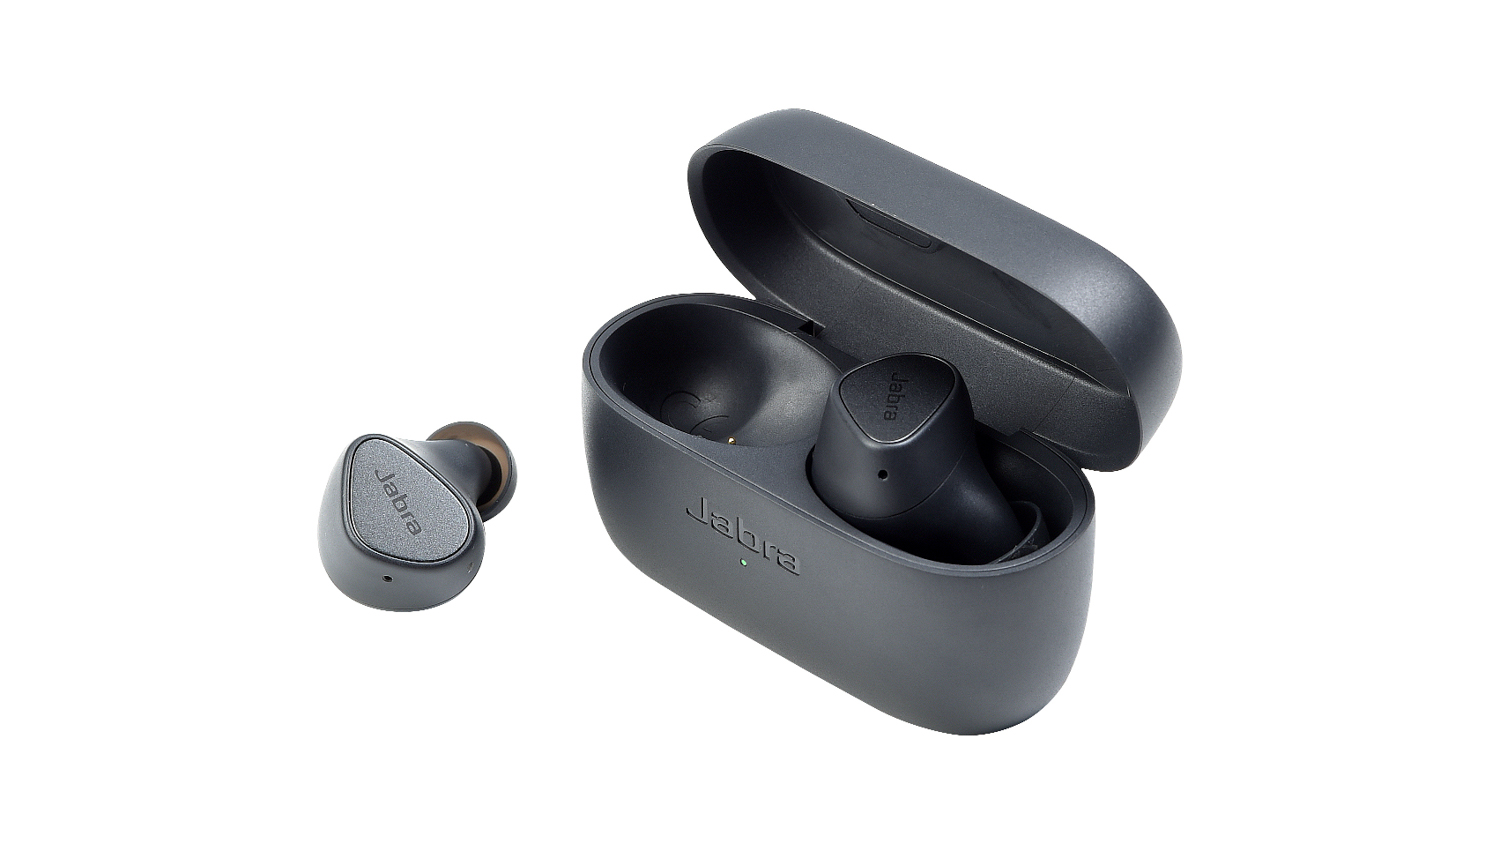 Jabra Elite 3 Review: Outstanding sound at just $119